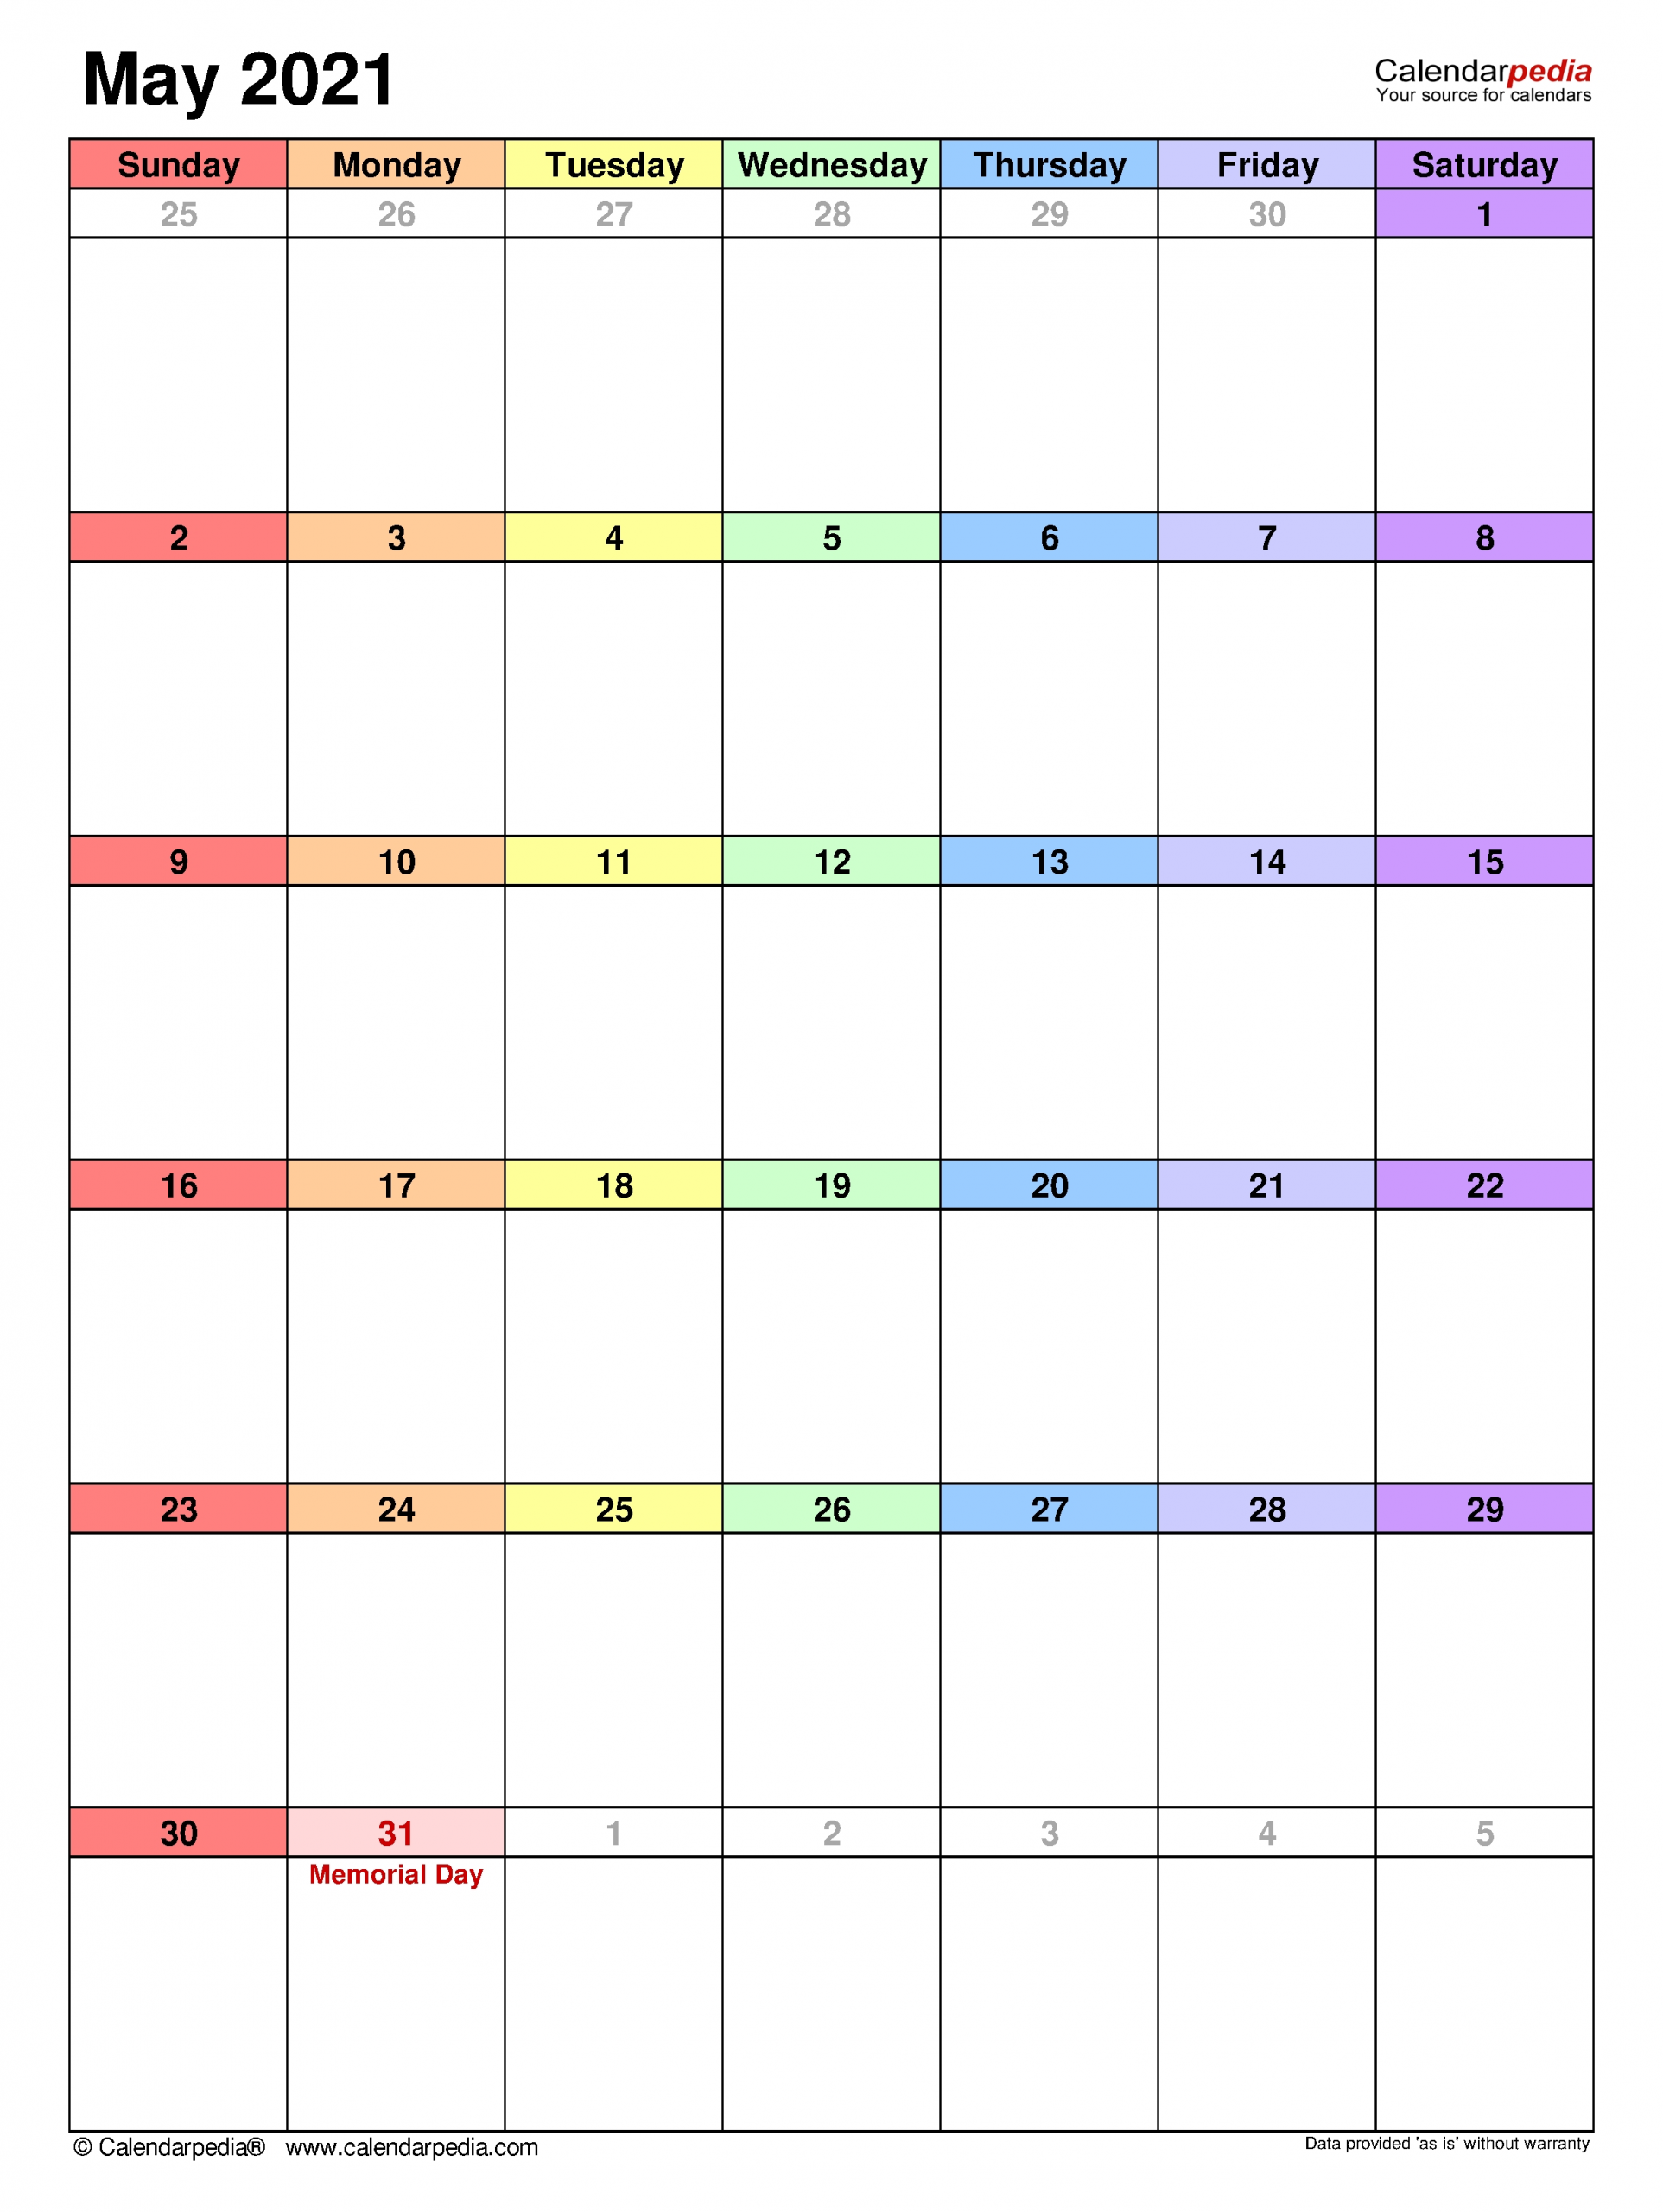 May 2021 Calendar | Templates For Word, Excel And Pdf